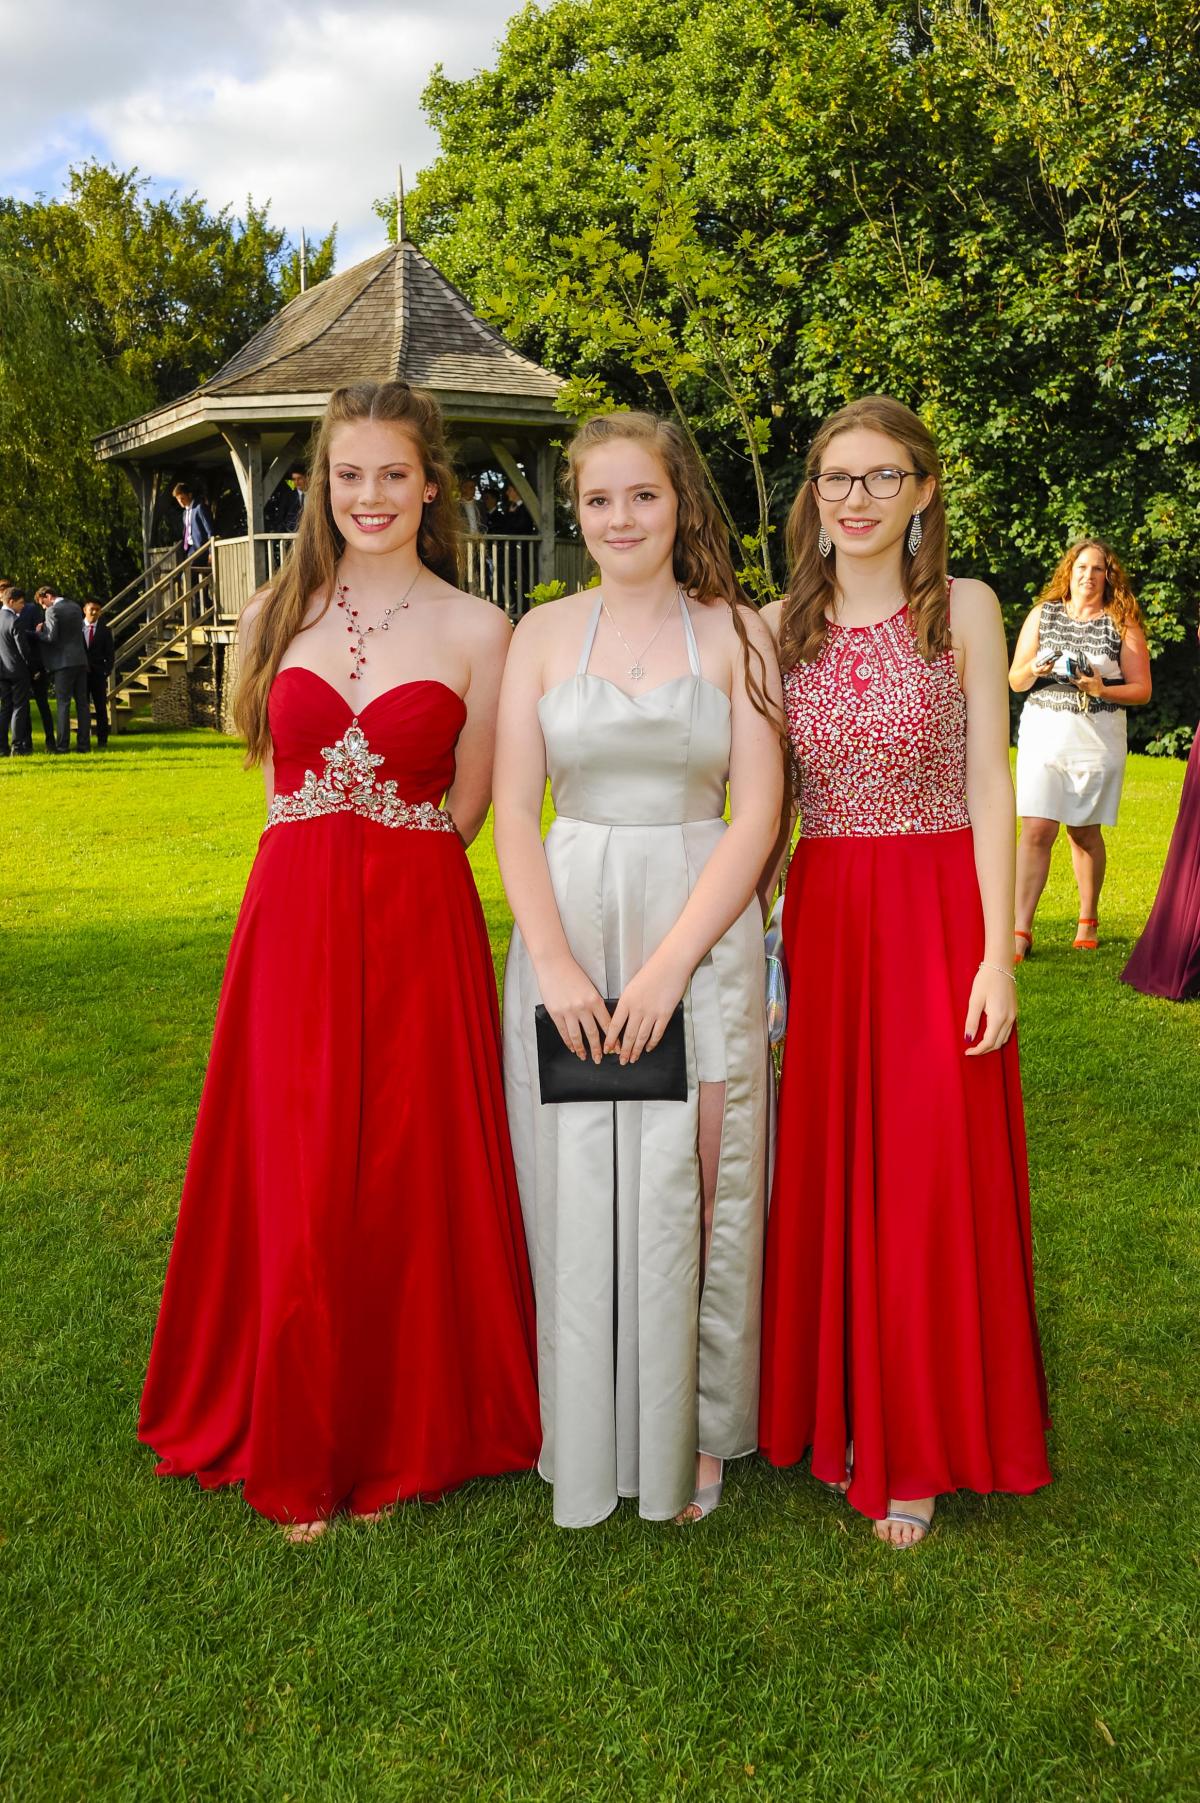 Summer Davis, Mia George and Morgan Carter, Pictures: GRAHAM HUNT PHOTOGRAPHY